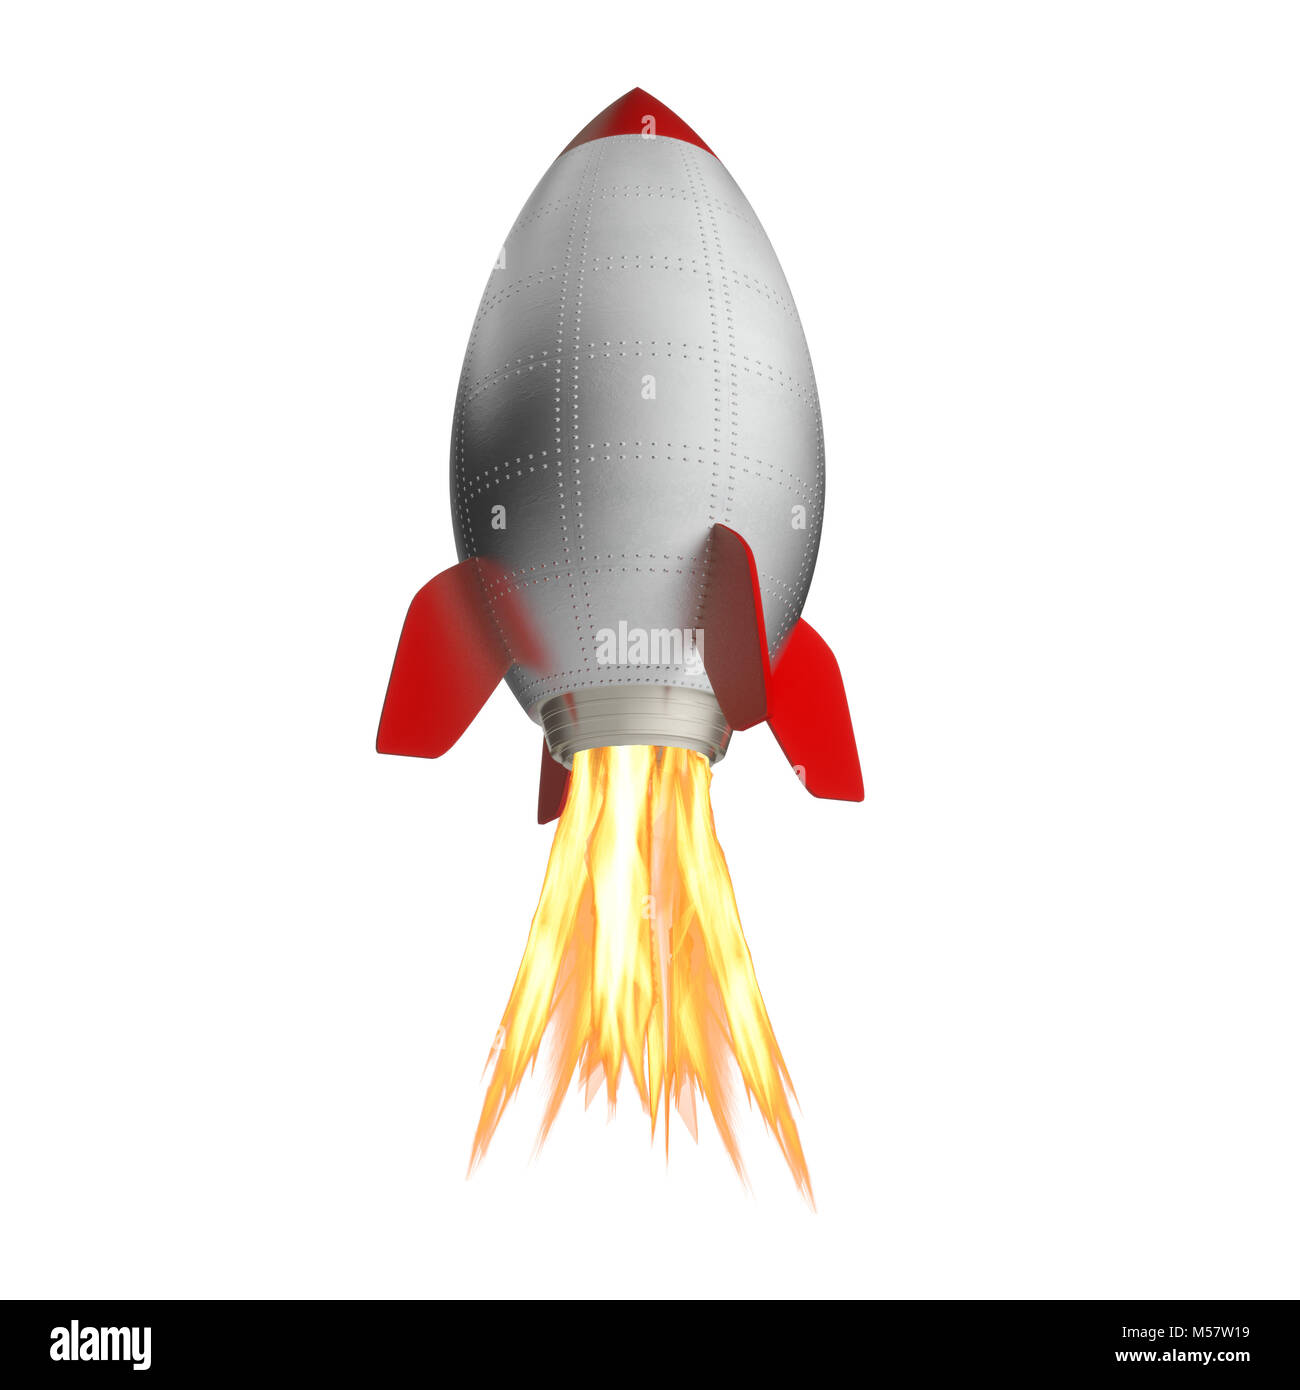 steel rocket with flame isolated on white background 3d rendering image Stock Photo